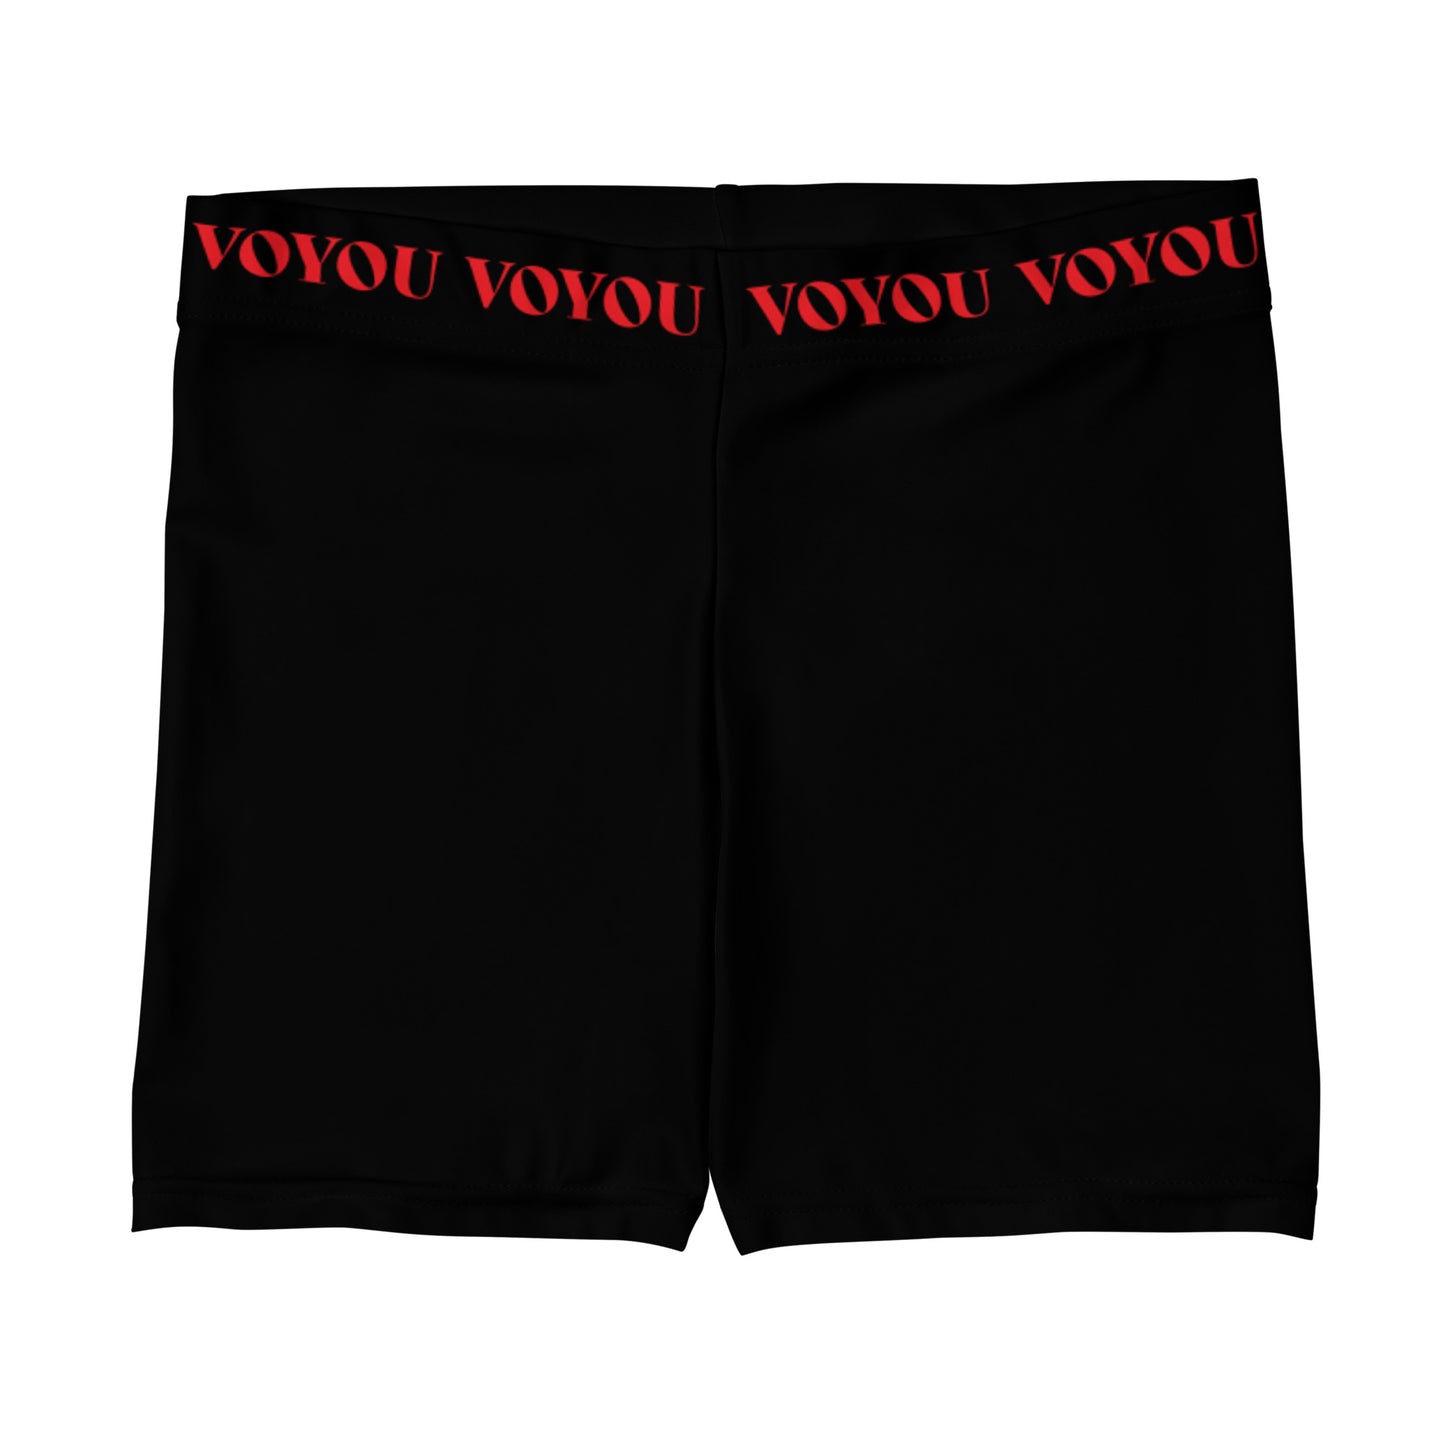 RED VOYOU SHORTS